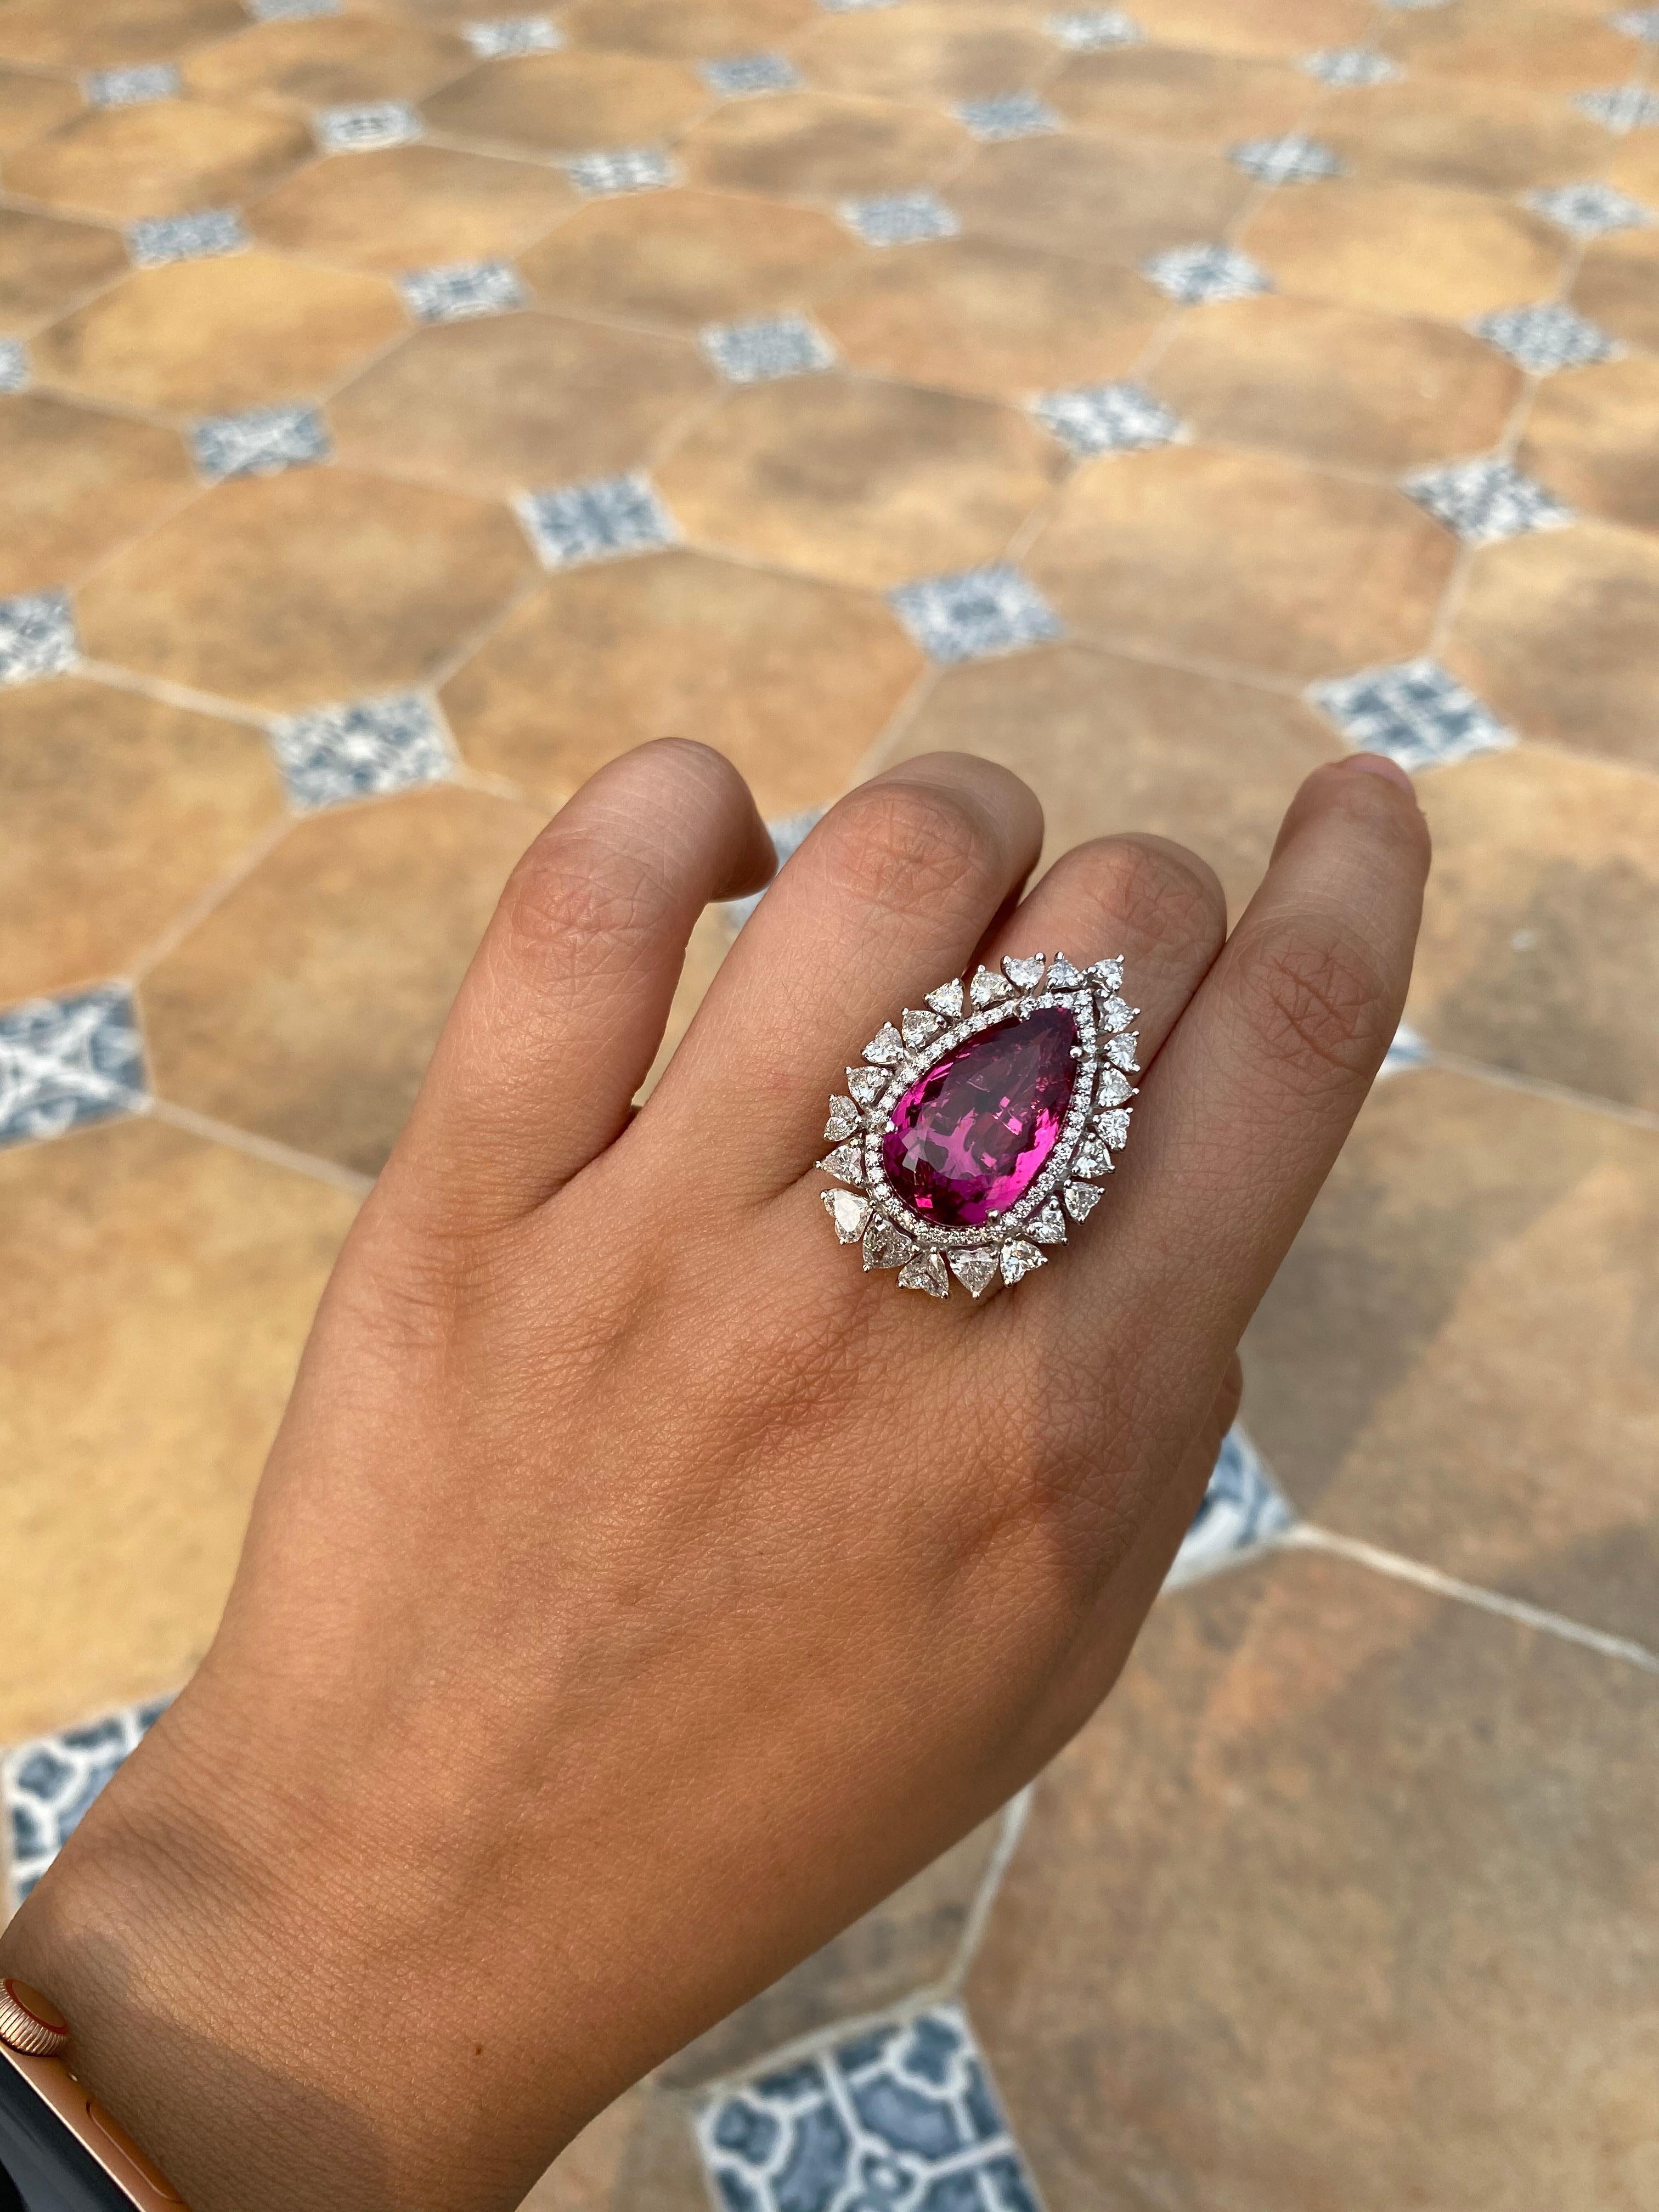 A gorgeous and Chic ring set in 18k white gold with Rubellite and heart shape diamonds. The high quality rubellite weight is 12.69 carats and diamond combined weight is 2.28 carats. The ring dimensions in cm 3.2 x 2.3 x 2.7 (LXWXH) . US size 6